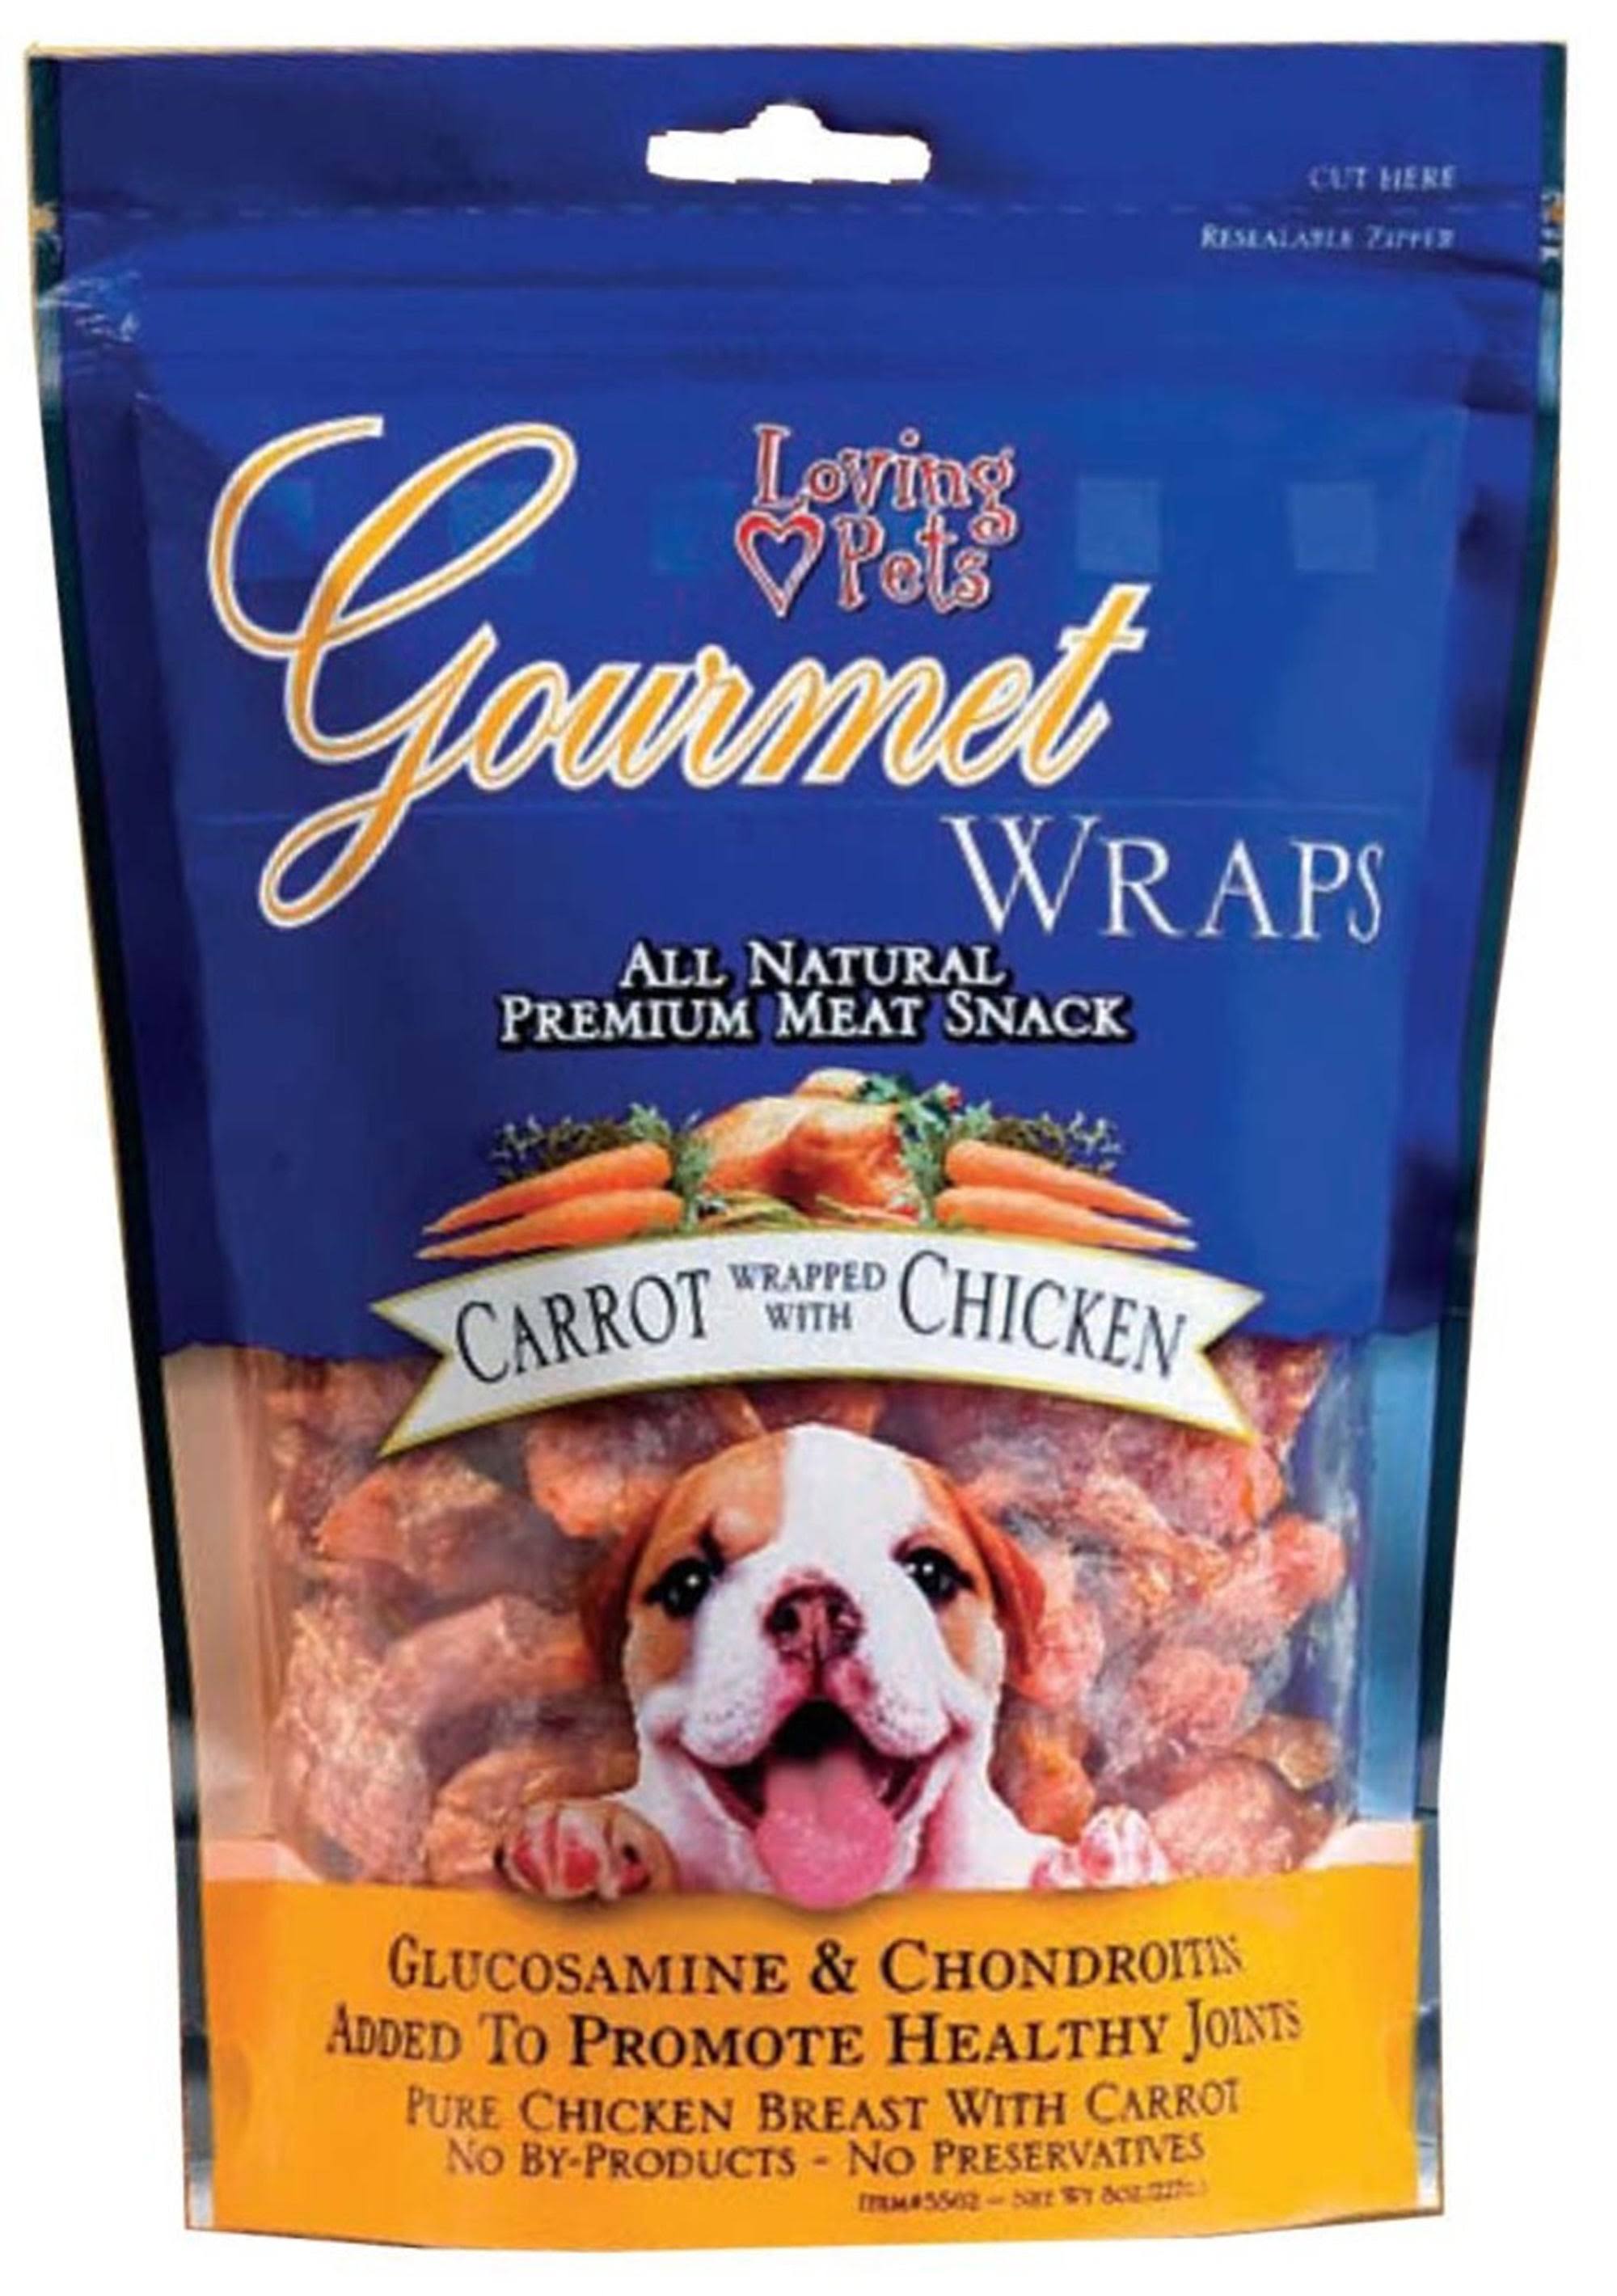 Loving Pets Gourmet Wraps Dog Treats - Carrot Wrapped with Chicken, 6oz